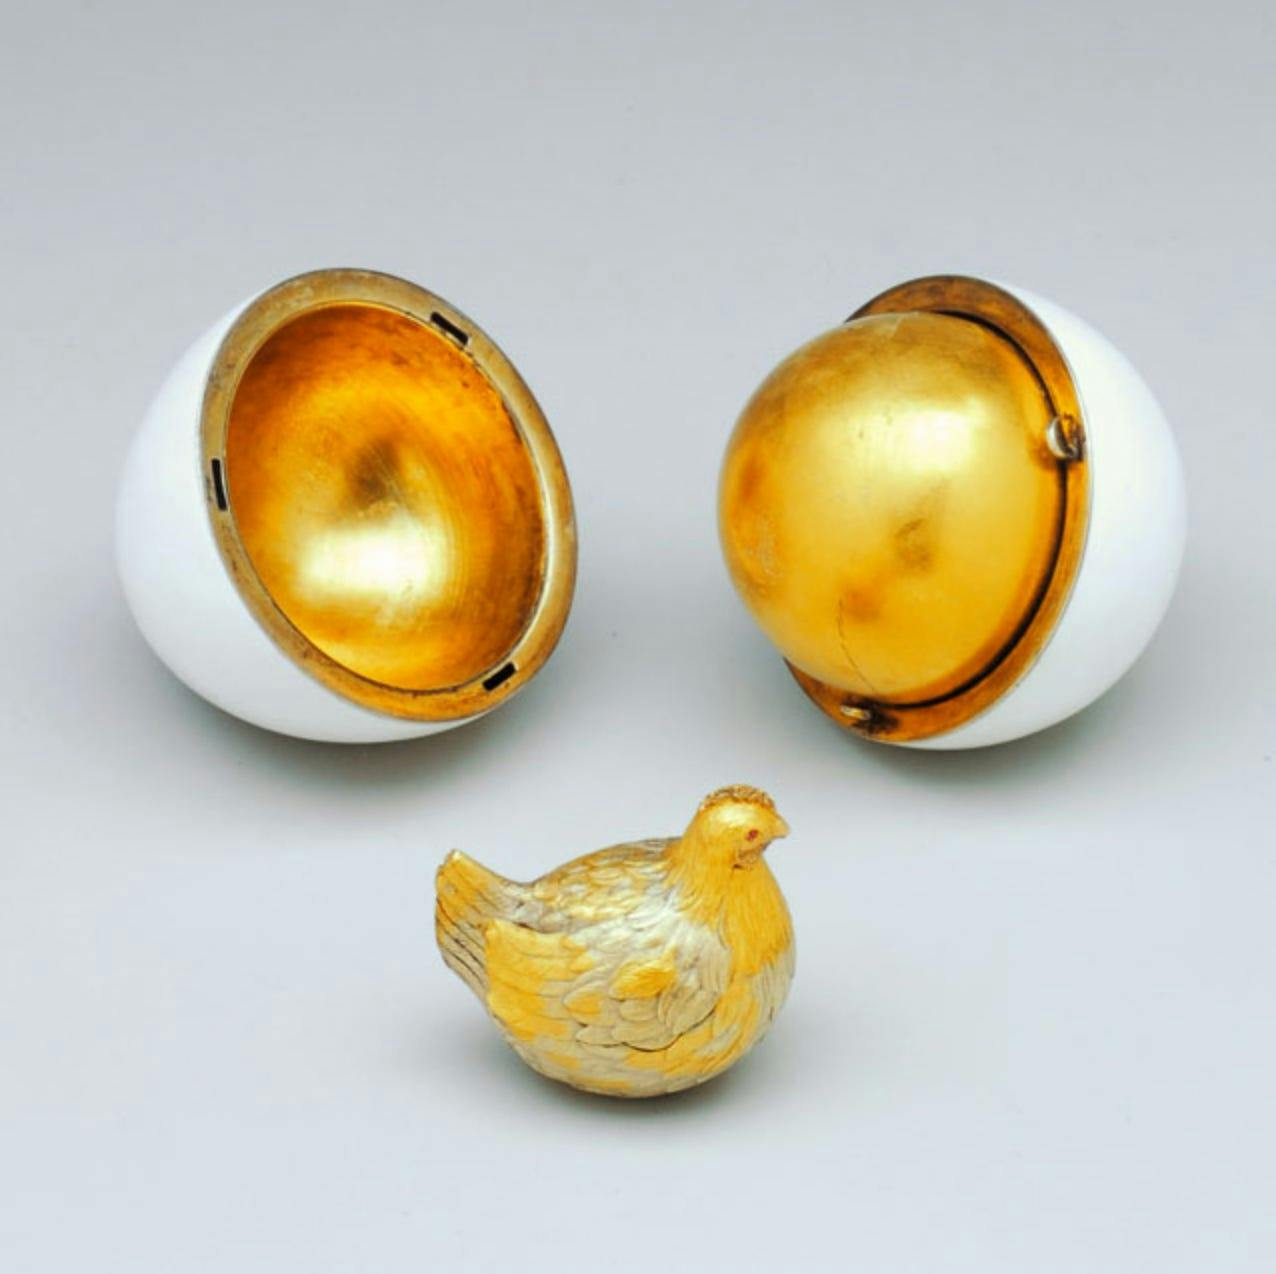 First Hen by Peter Carl Fabergé, 1885. [An egg split apart with a golden inside and a small golden hen in front of it.]